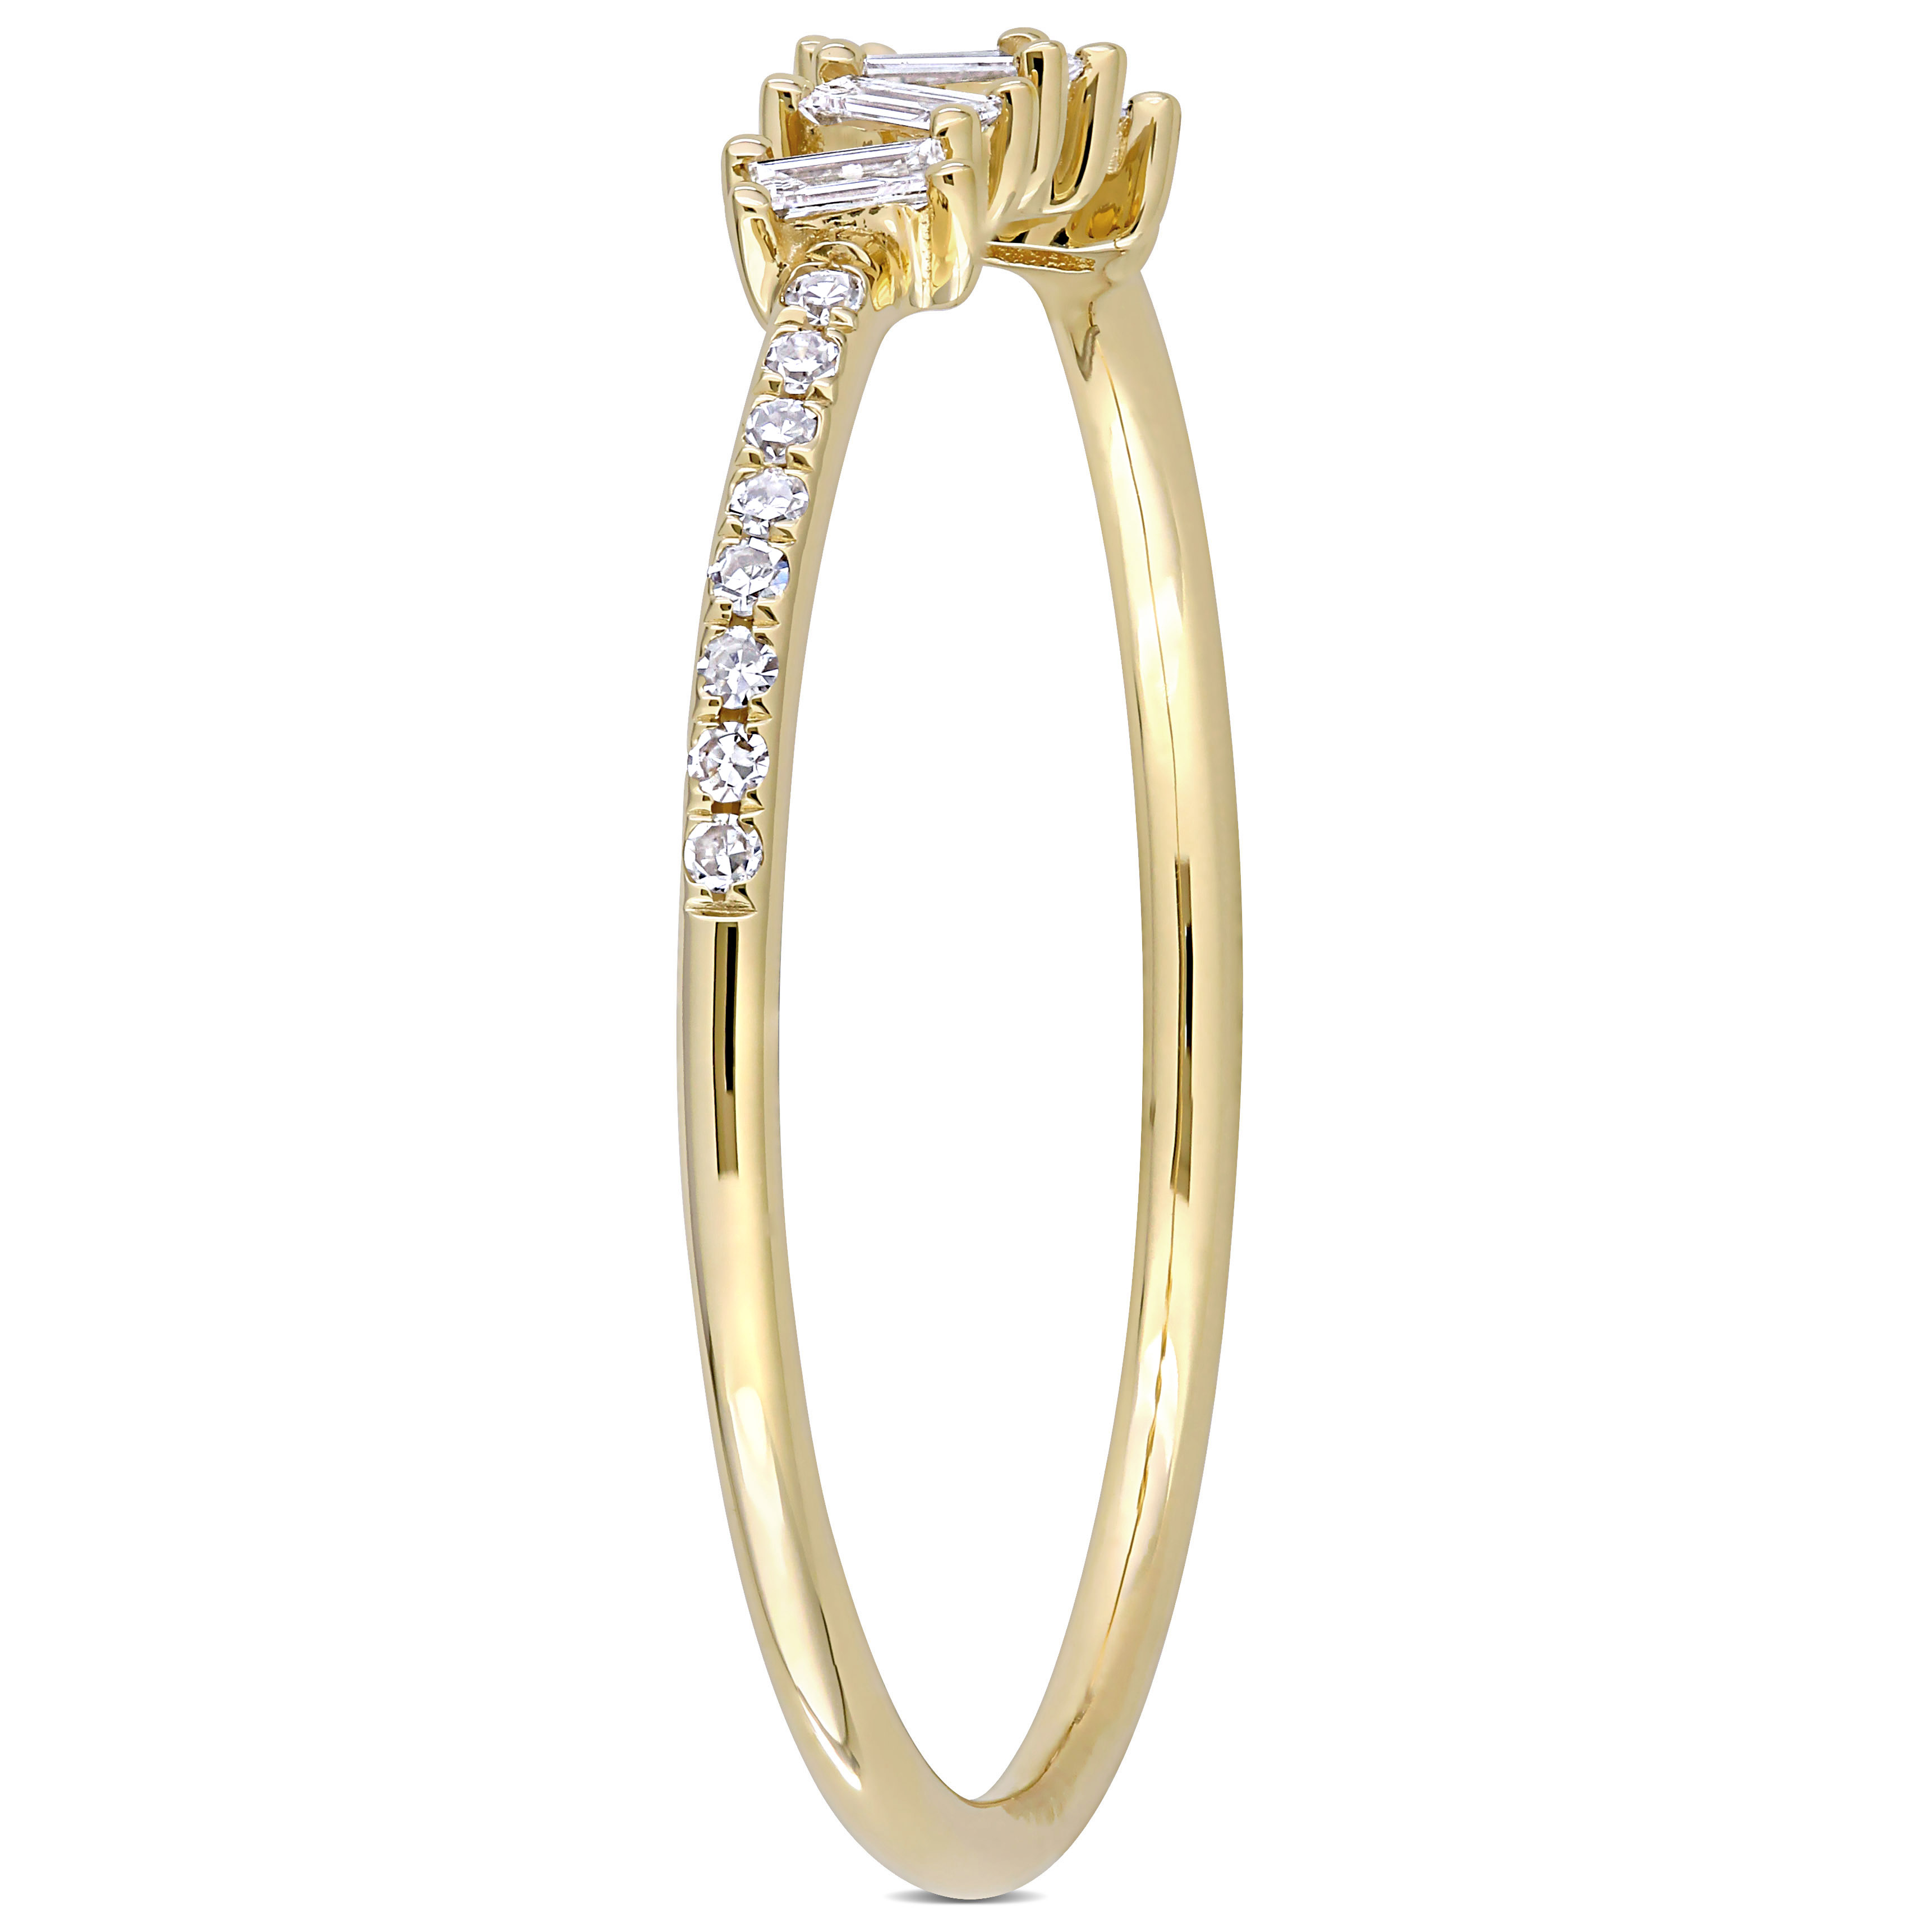 1/6 CT TW Baguette & Round Diamond Ring in 14k Yellow Gold